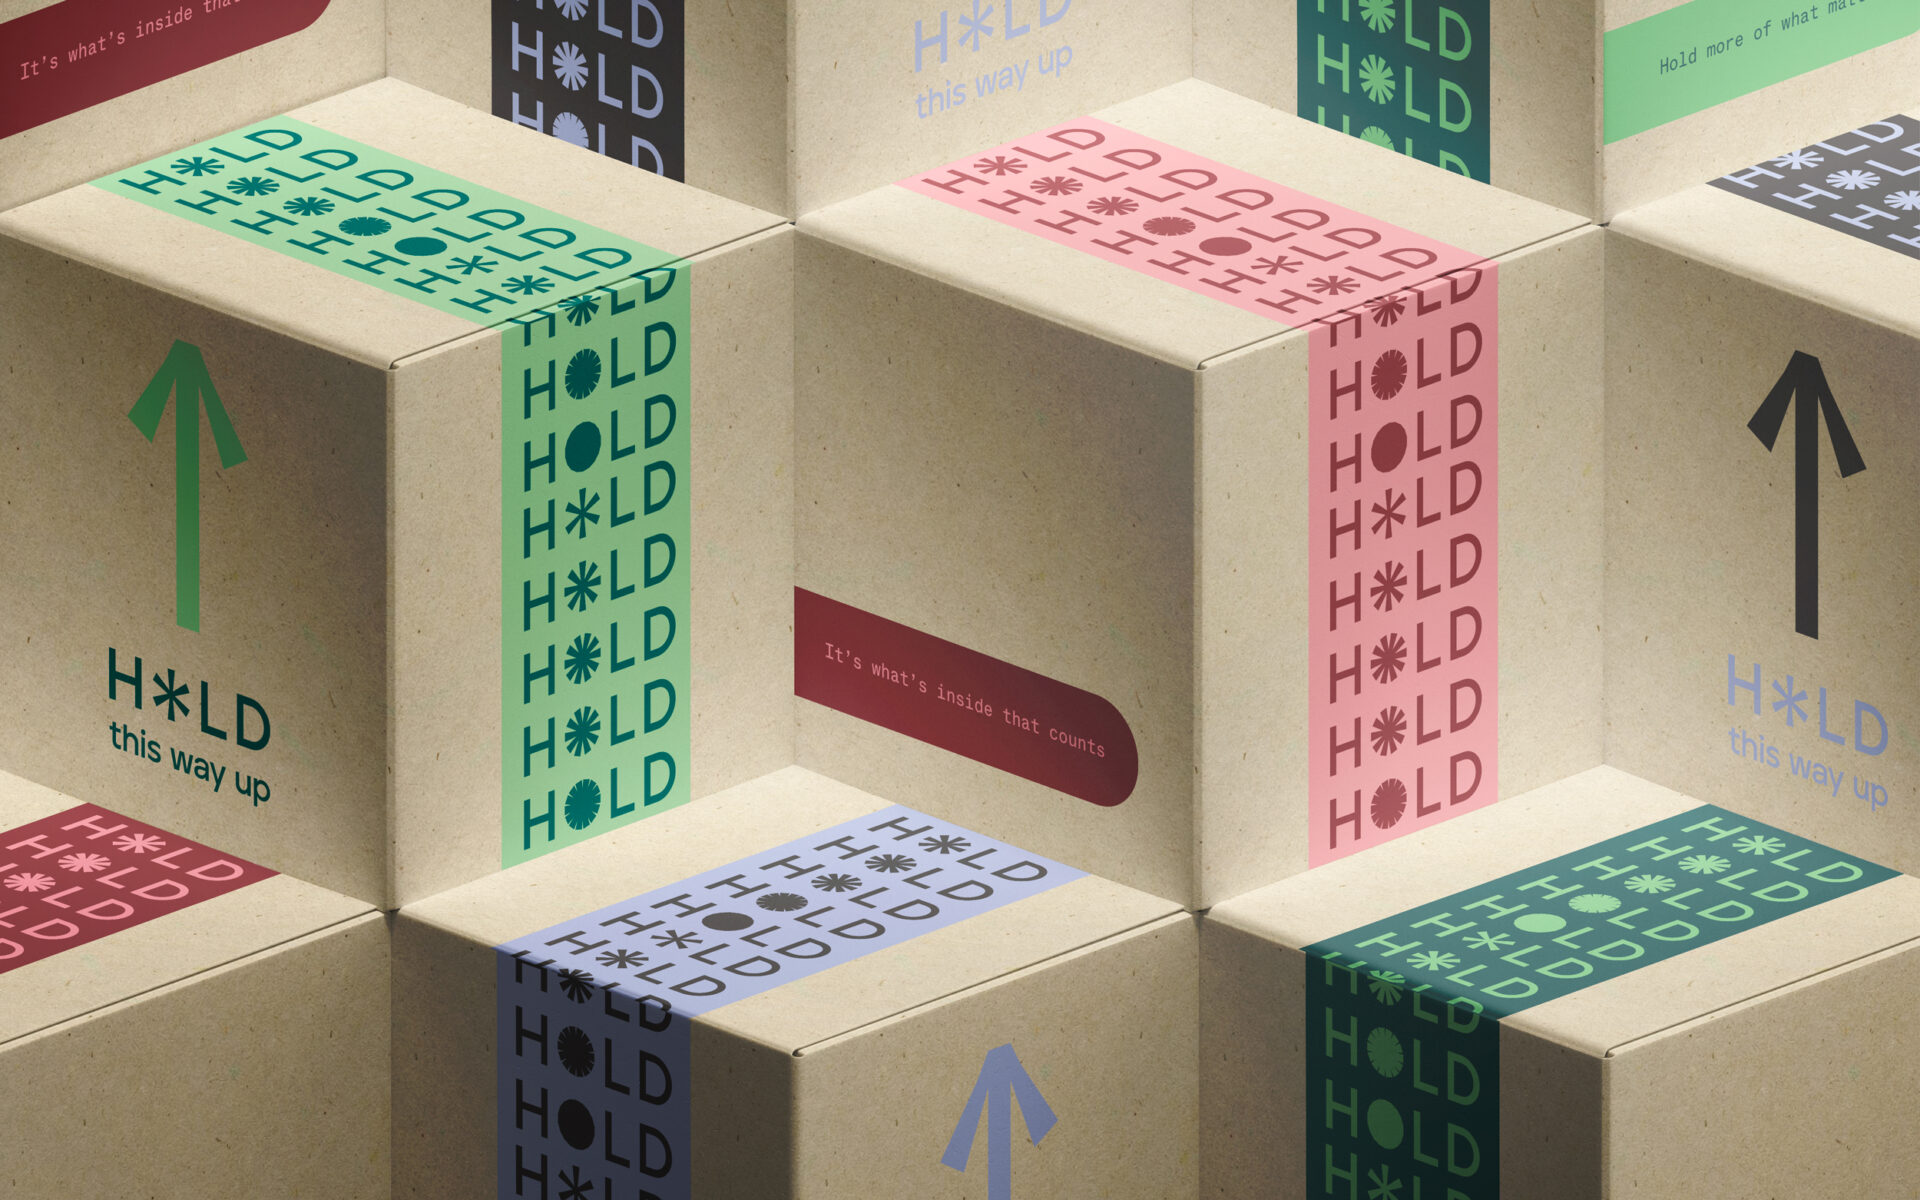 Self Storage modern branding development featuring branded kraft boxes isometric stack by 3Stories Interior and brand